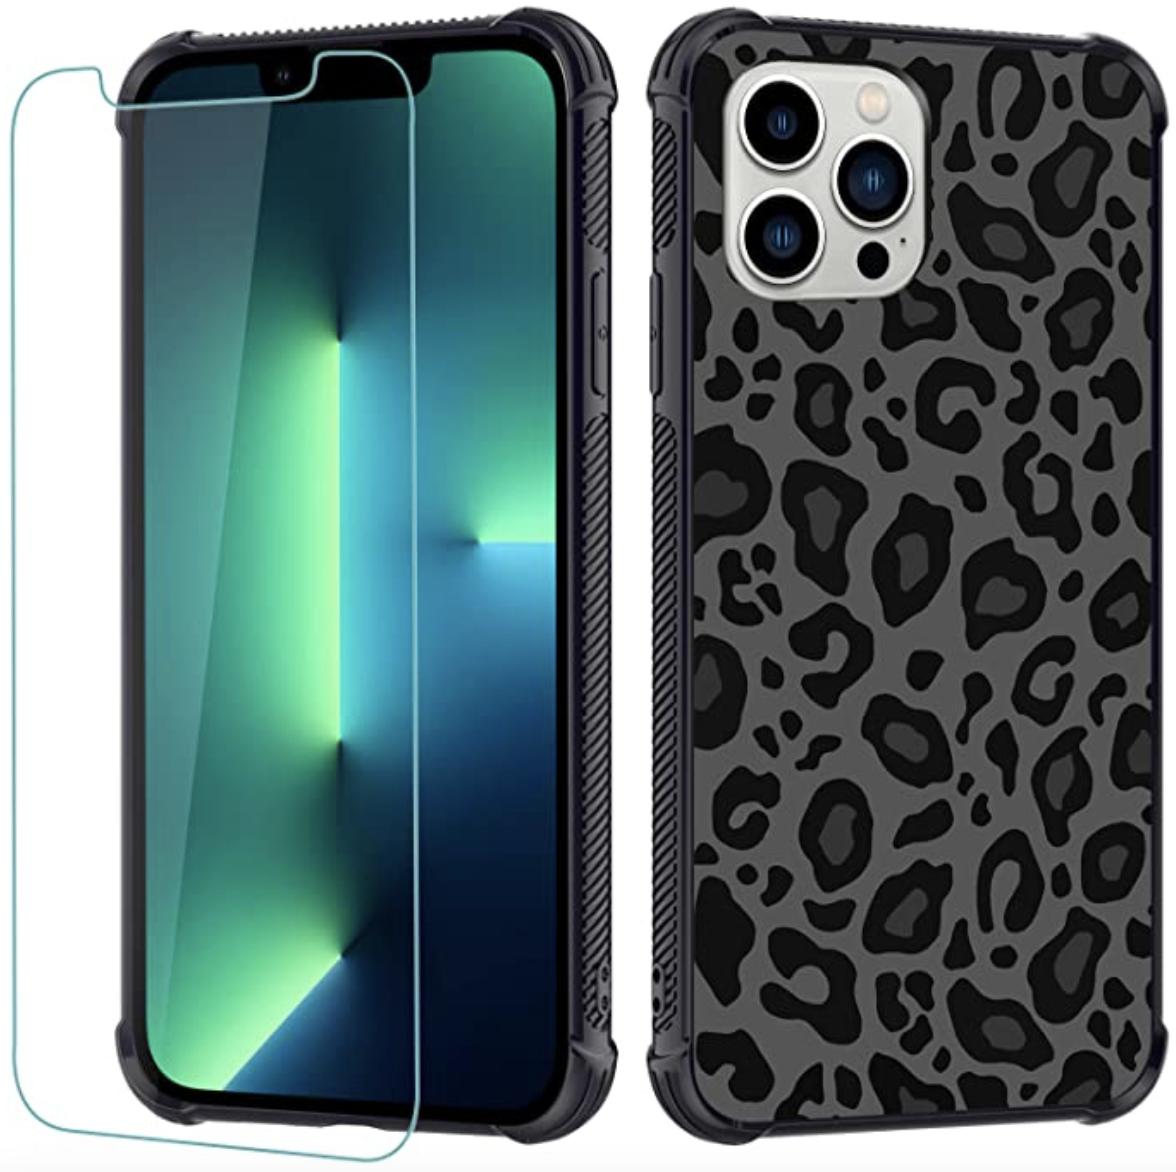 Mzelq Iphone 13 Pro Max Case Render Cropped